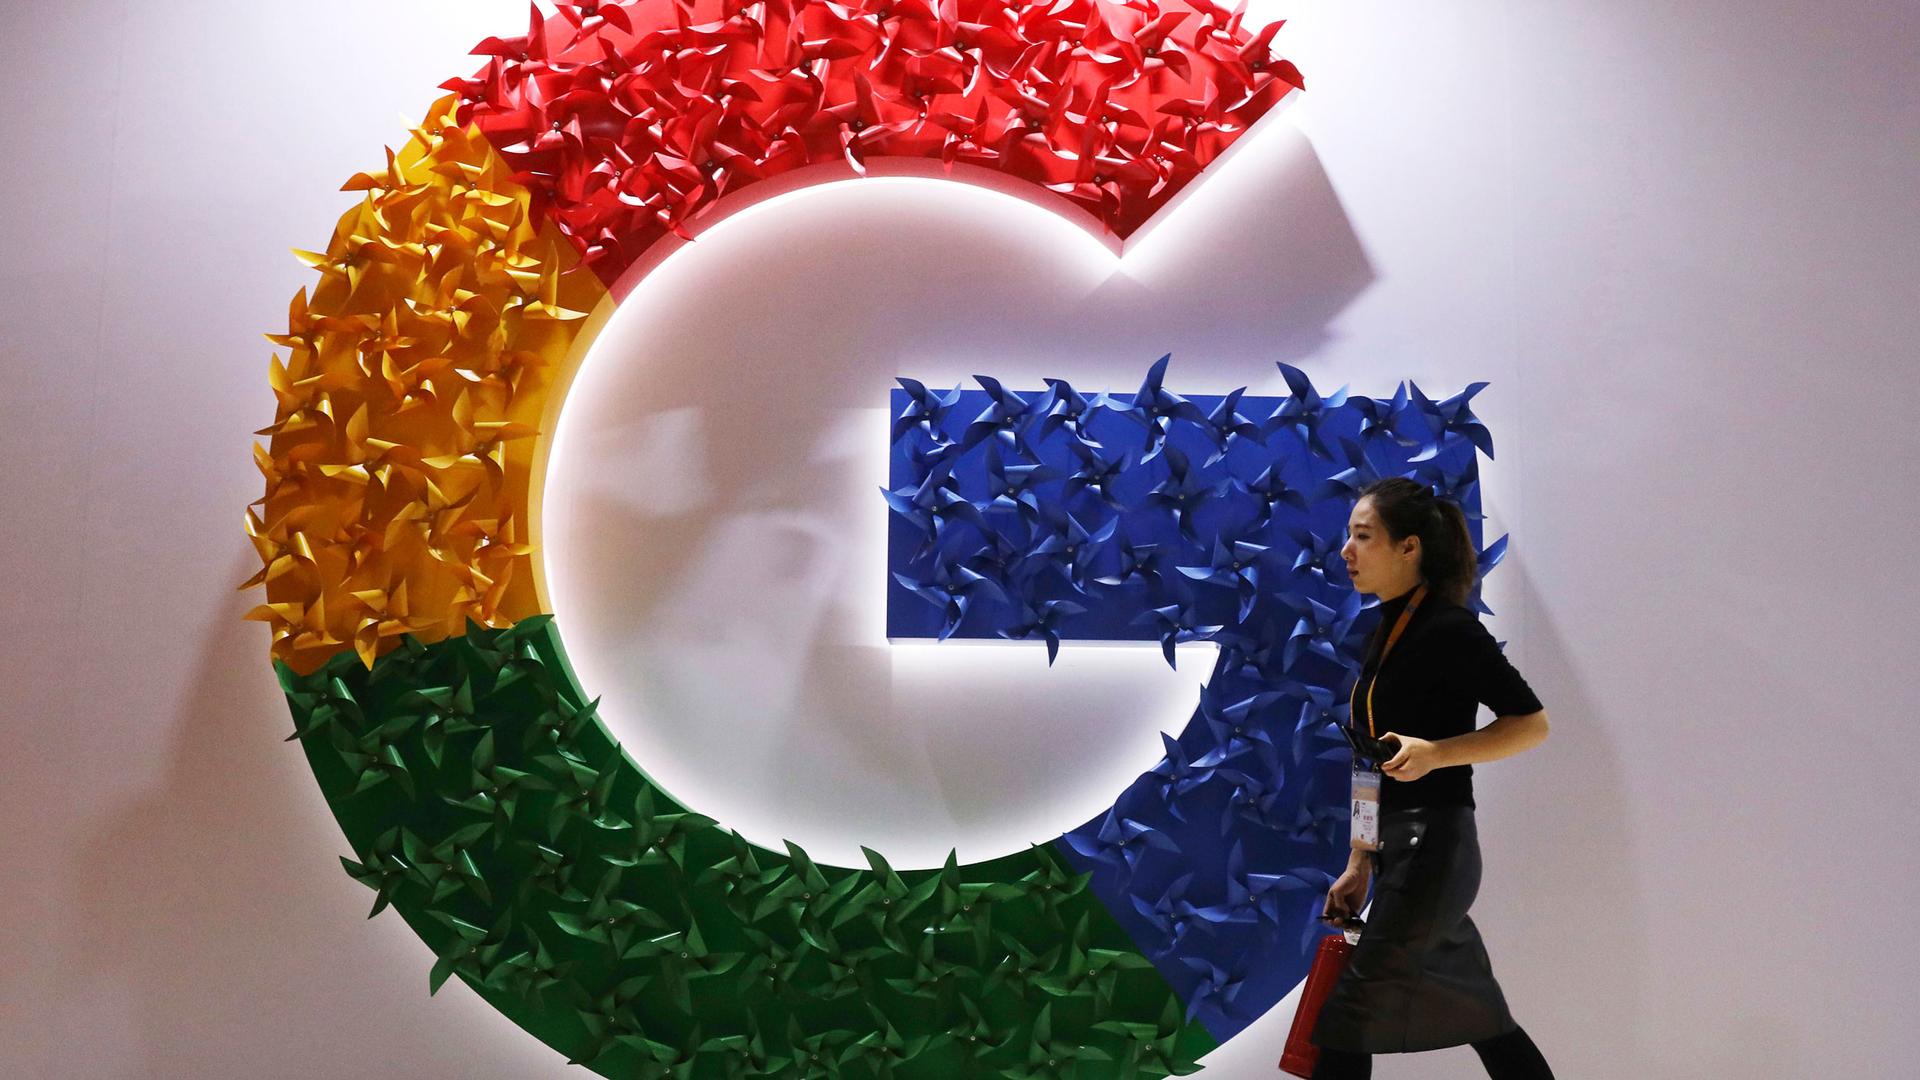 A woman wearing a skirt and name badge walks past the logo for Google affixed to the wall.